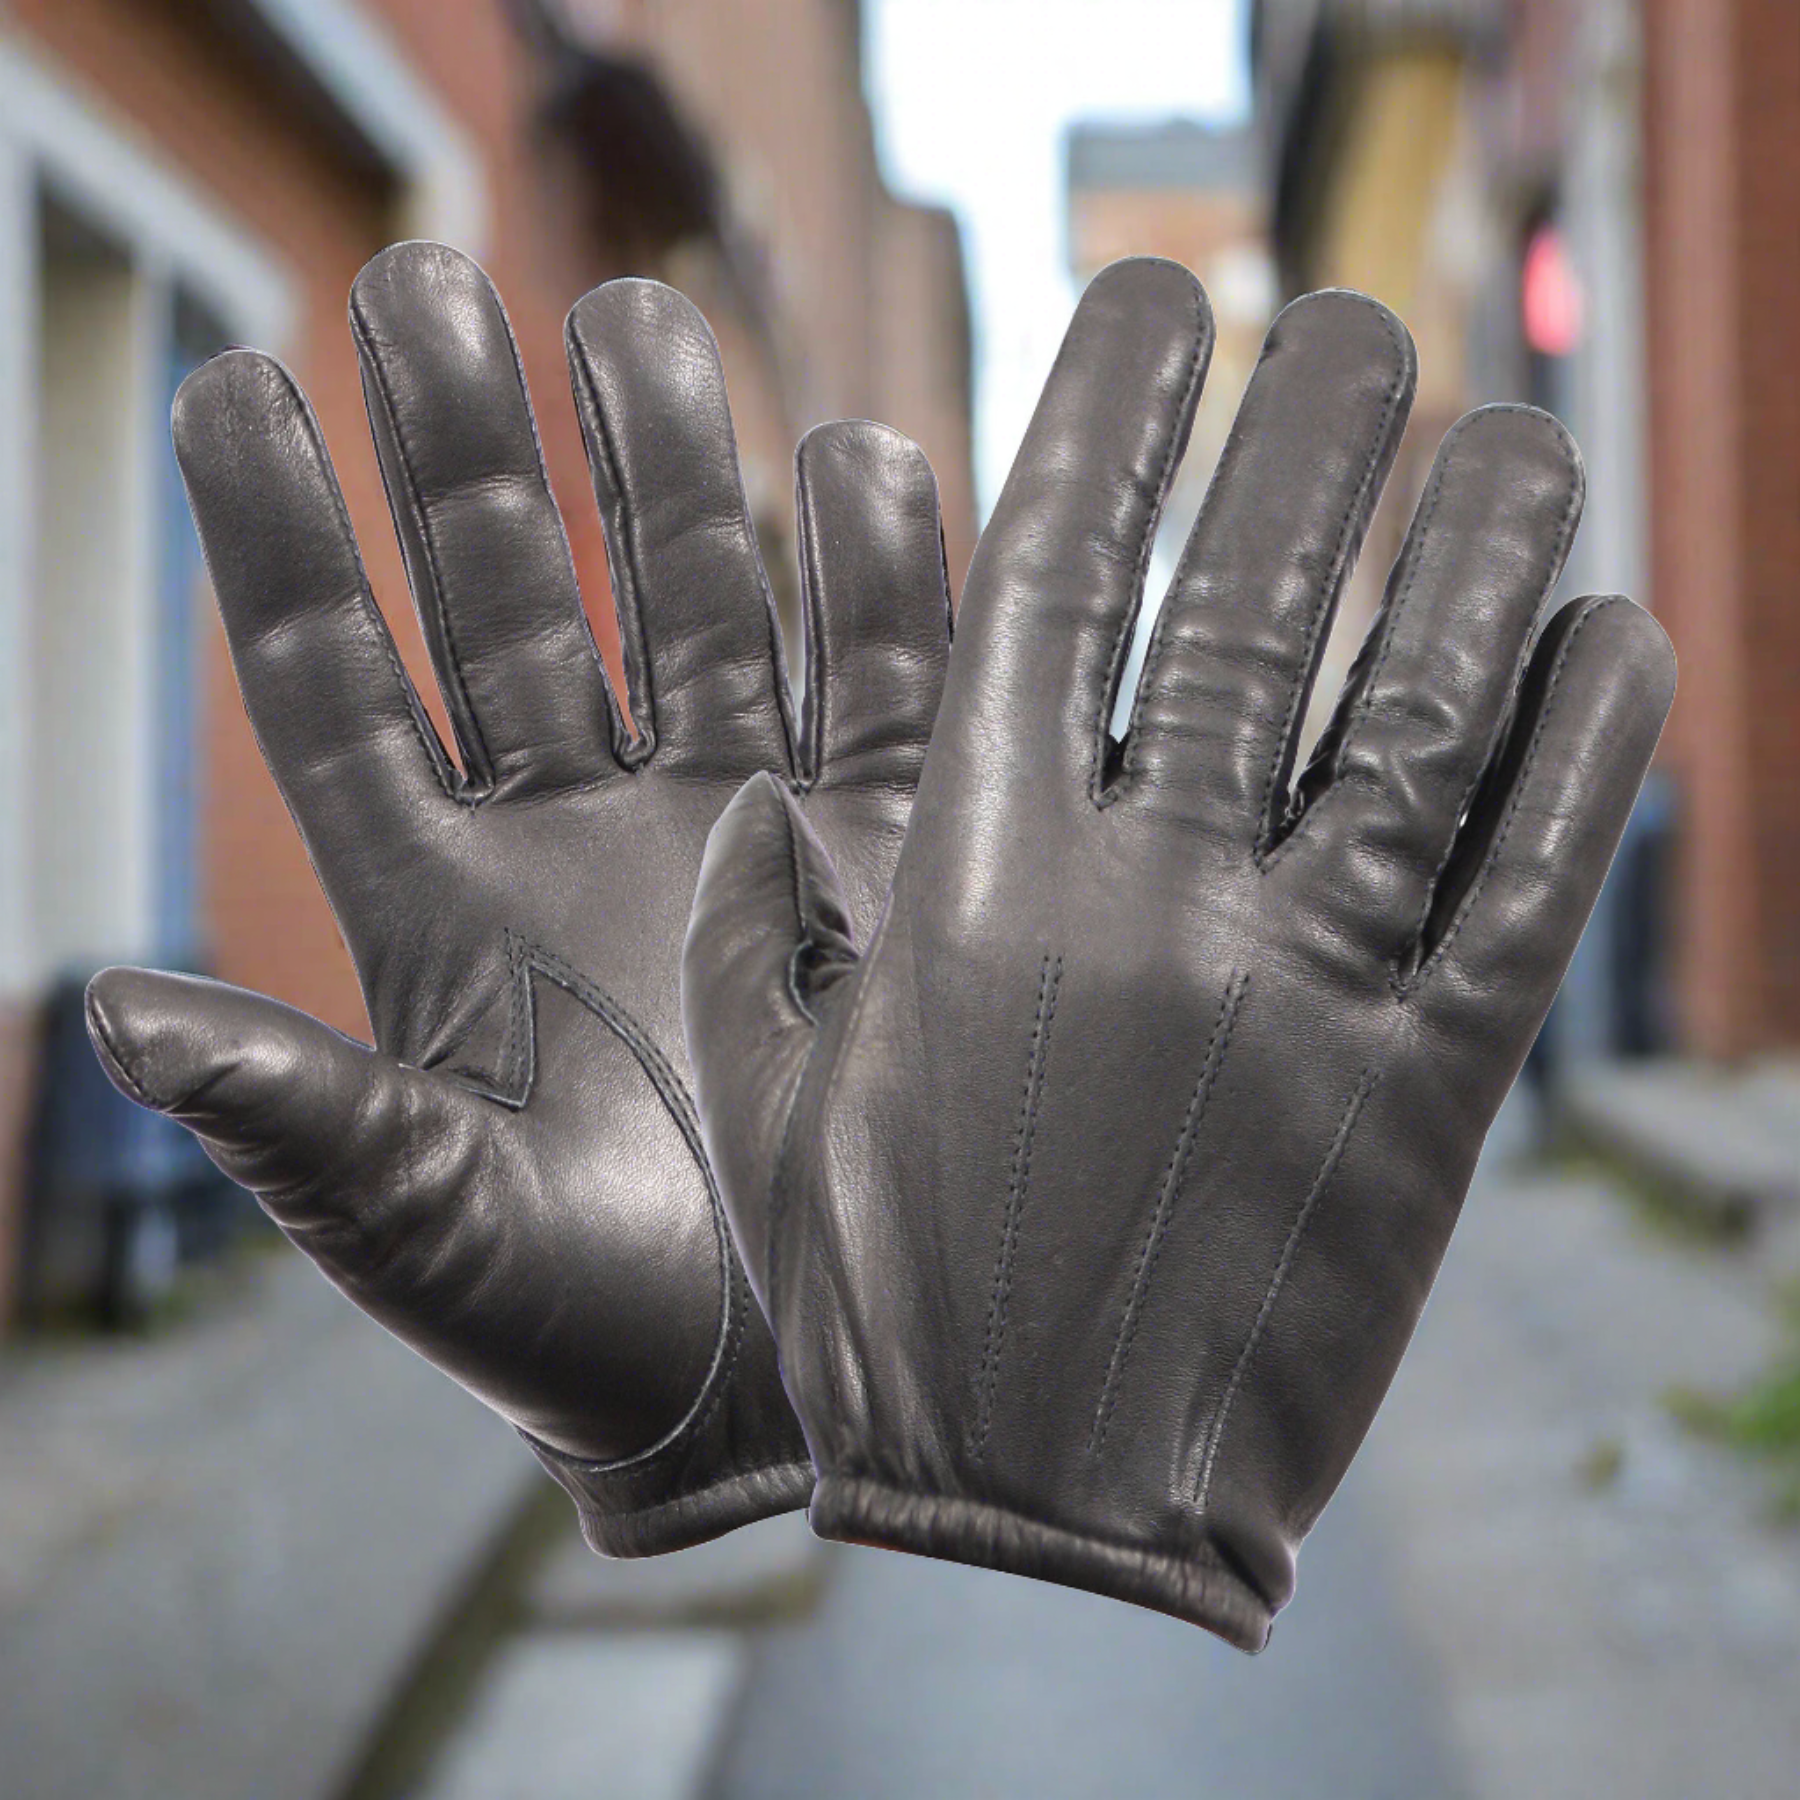 Cut Resistant Gloves - Rothco Police Cut Resistant Lined Gloves